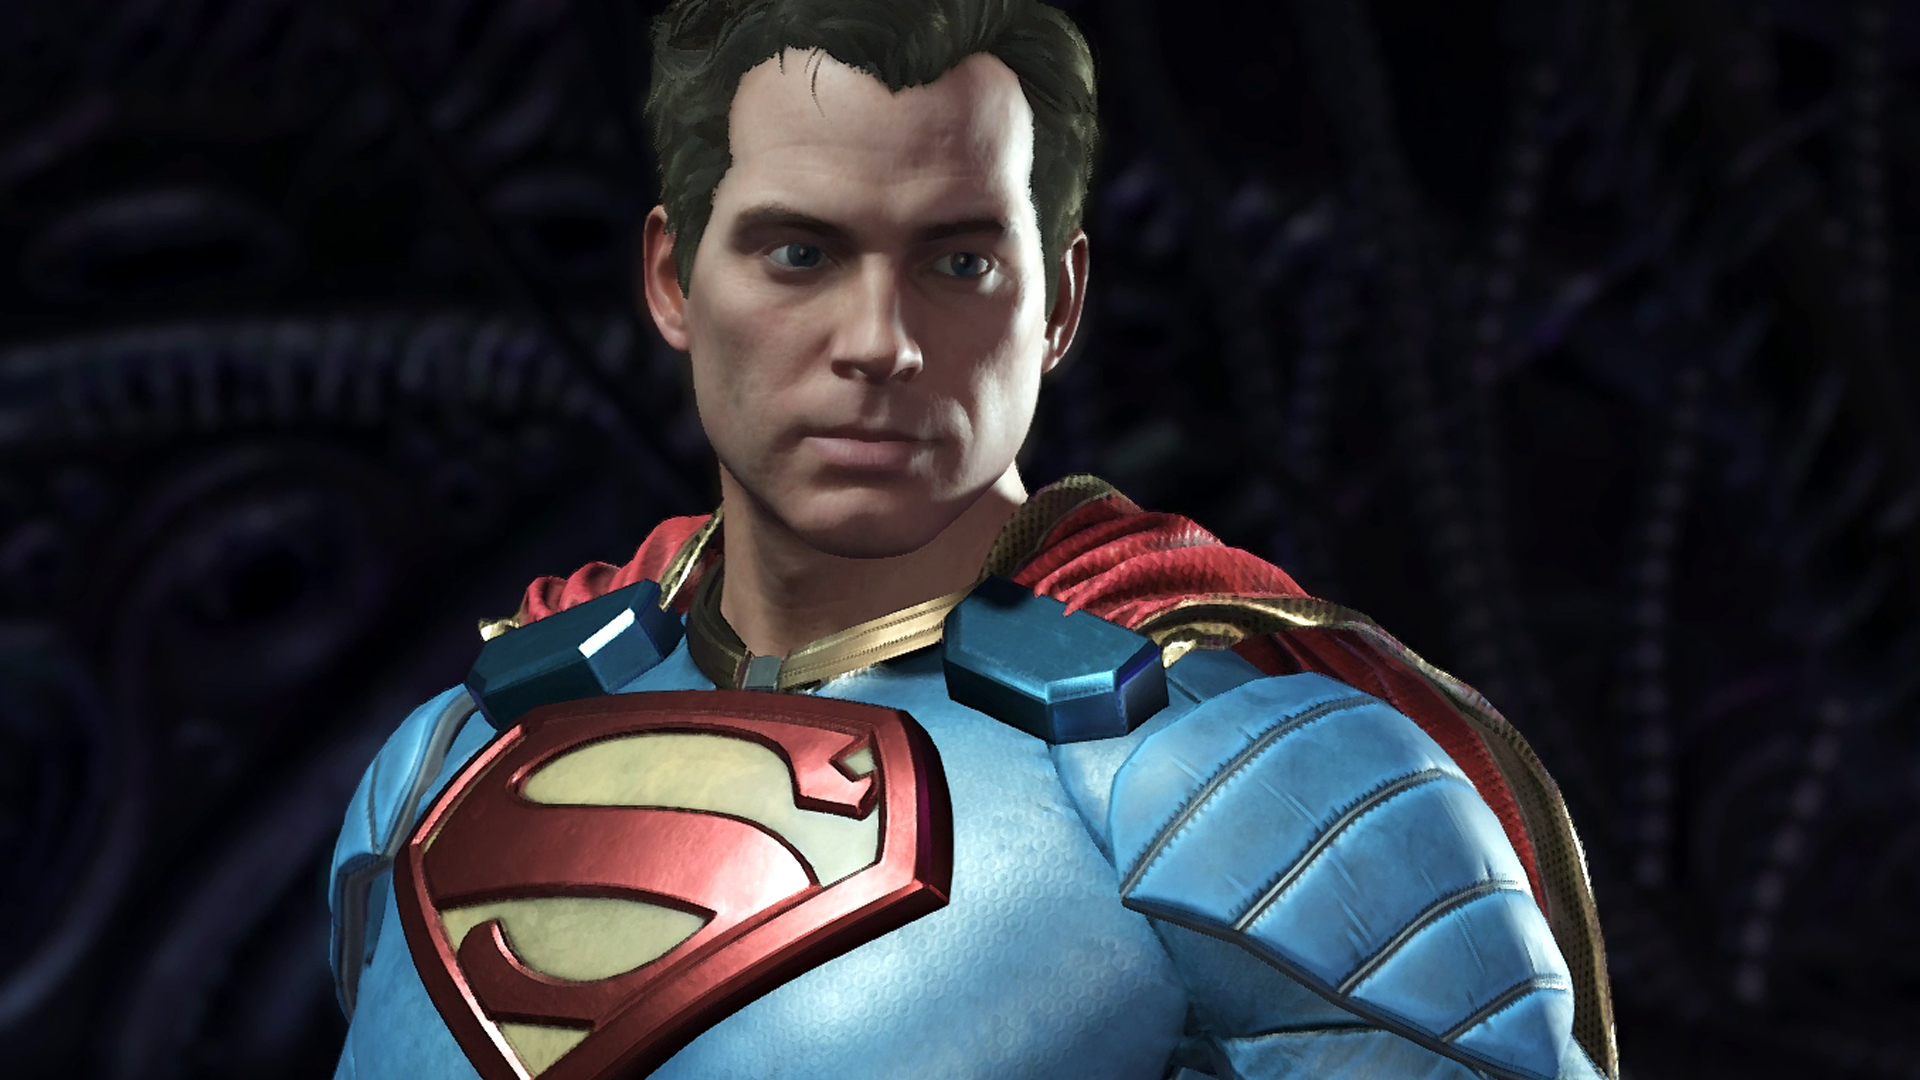 Here's a Superman game built in The Matrix Unreal 5 demo